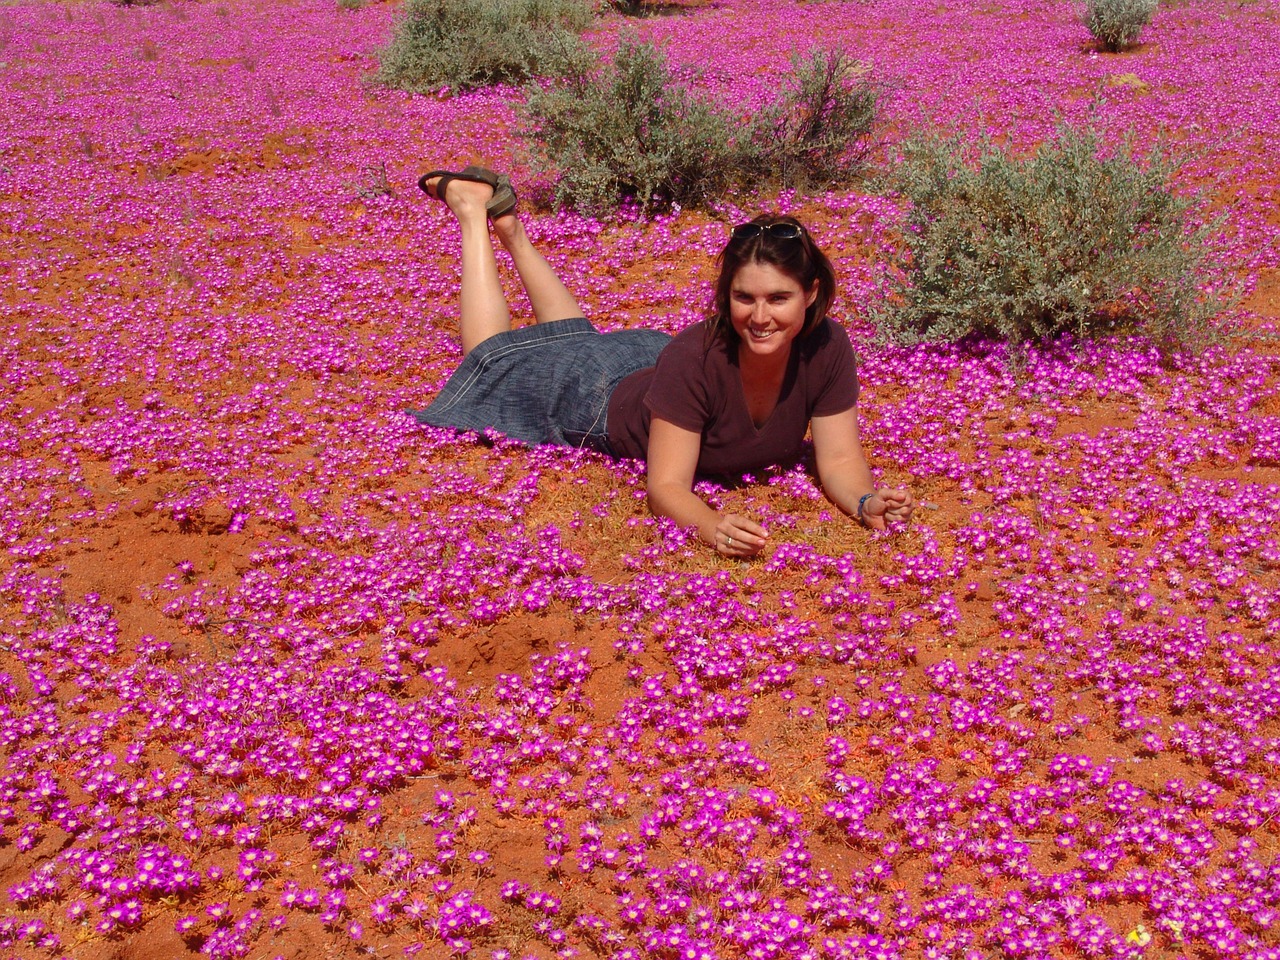 wildflowers woman outback free photo